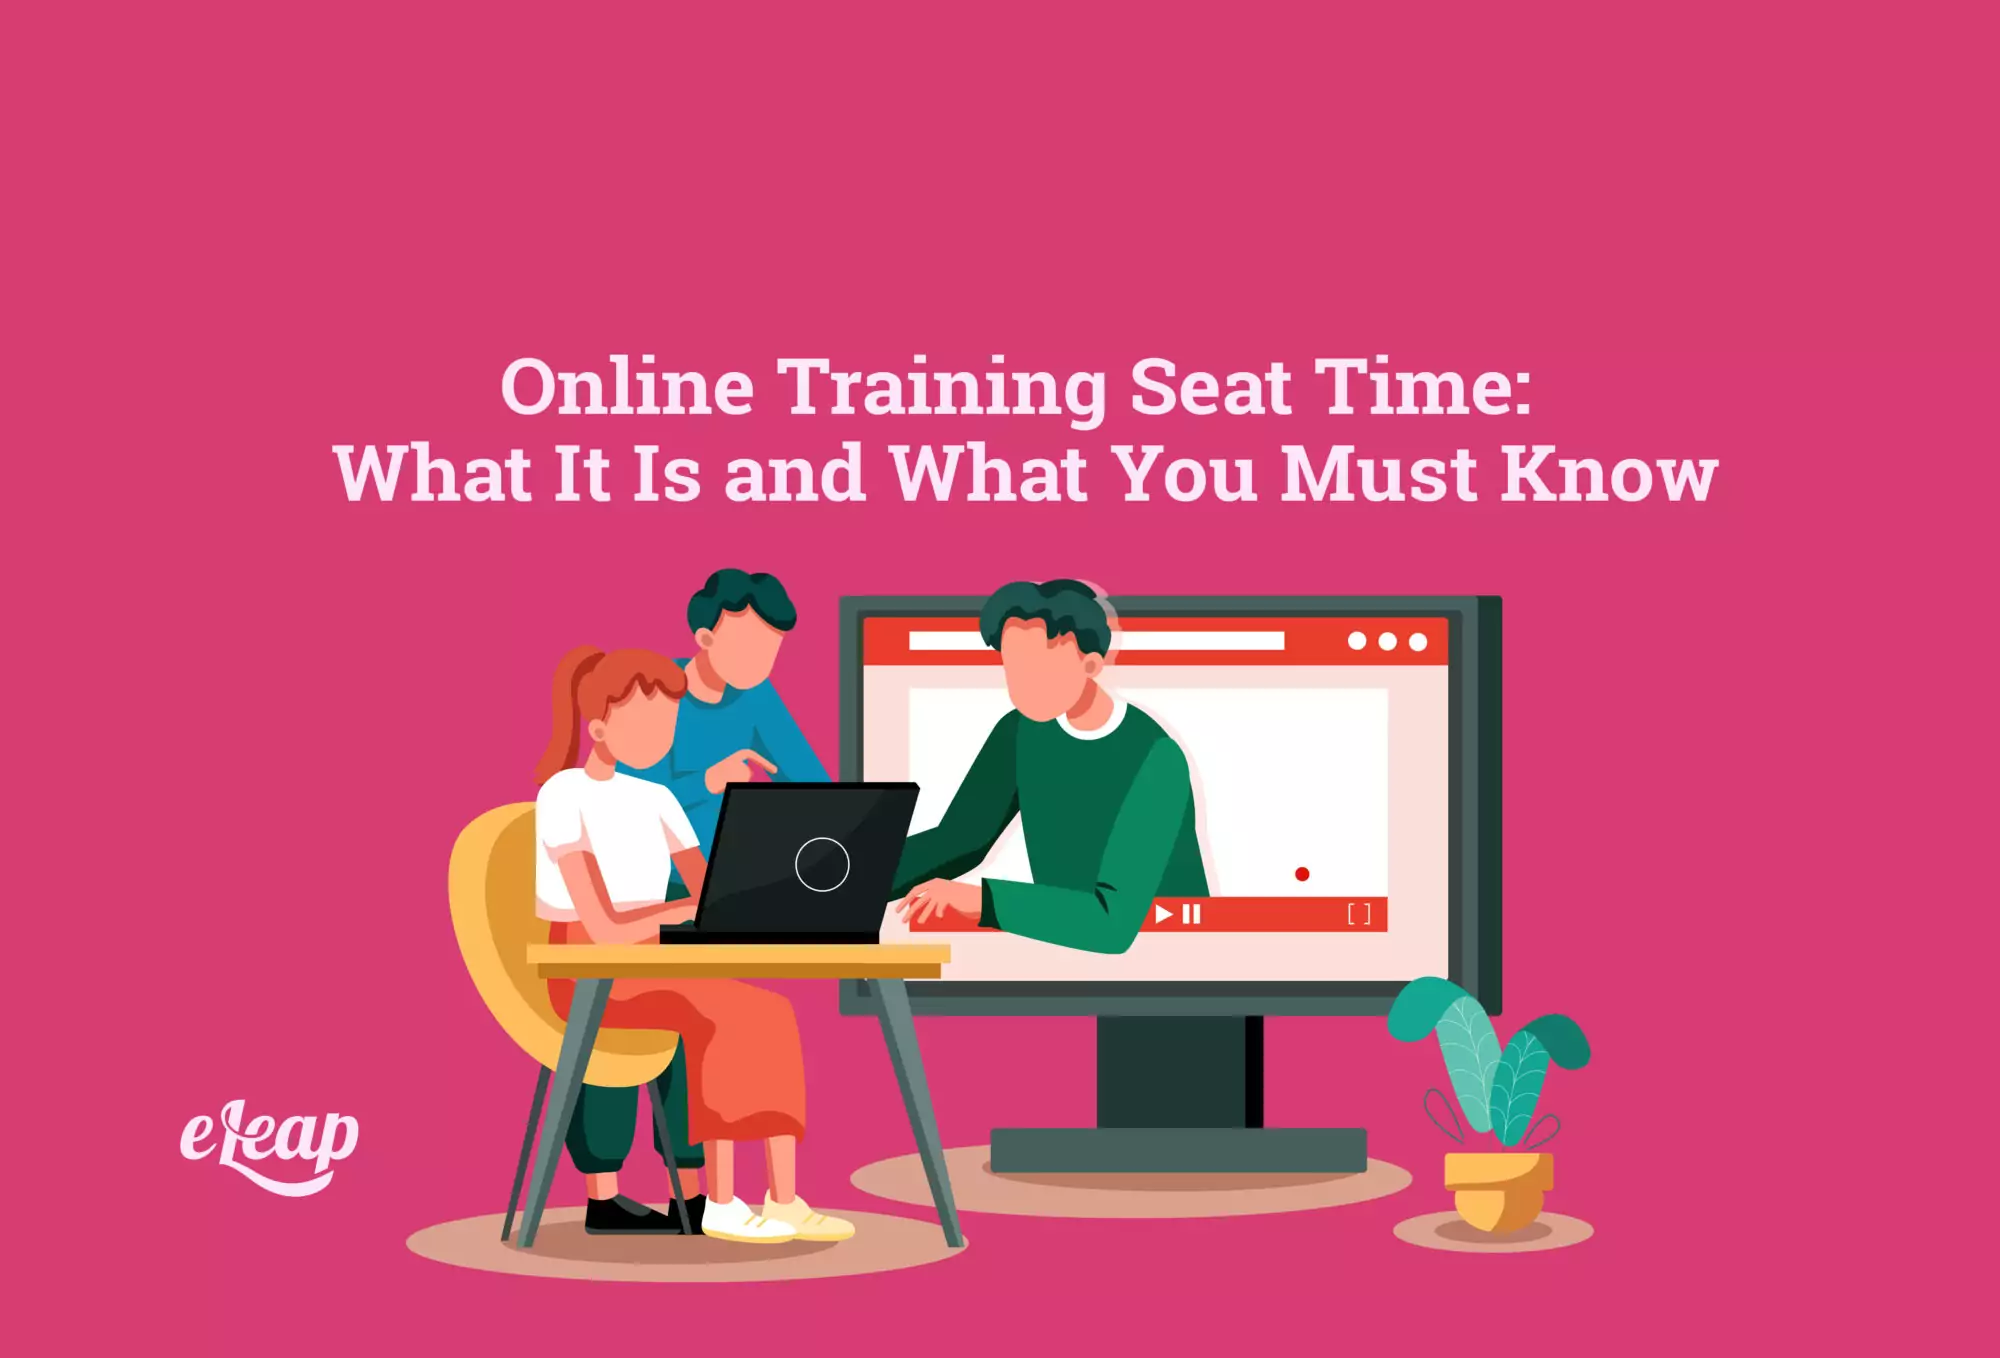 Online Training Seat Time: What It Is and What You Must Know